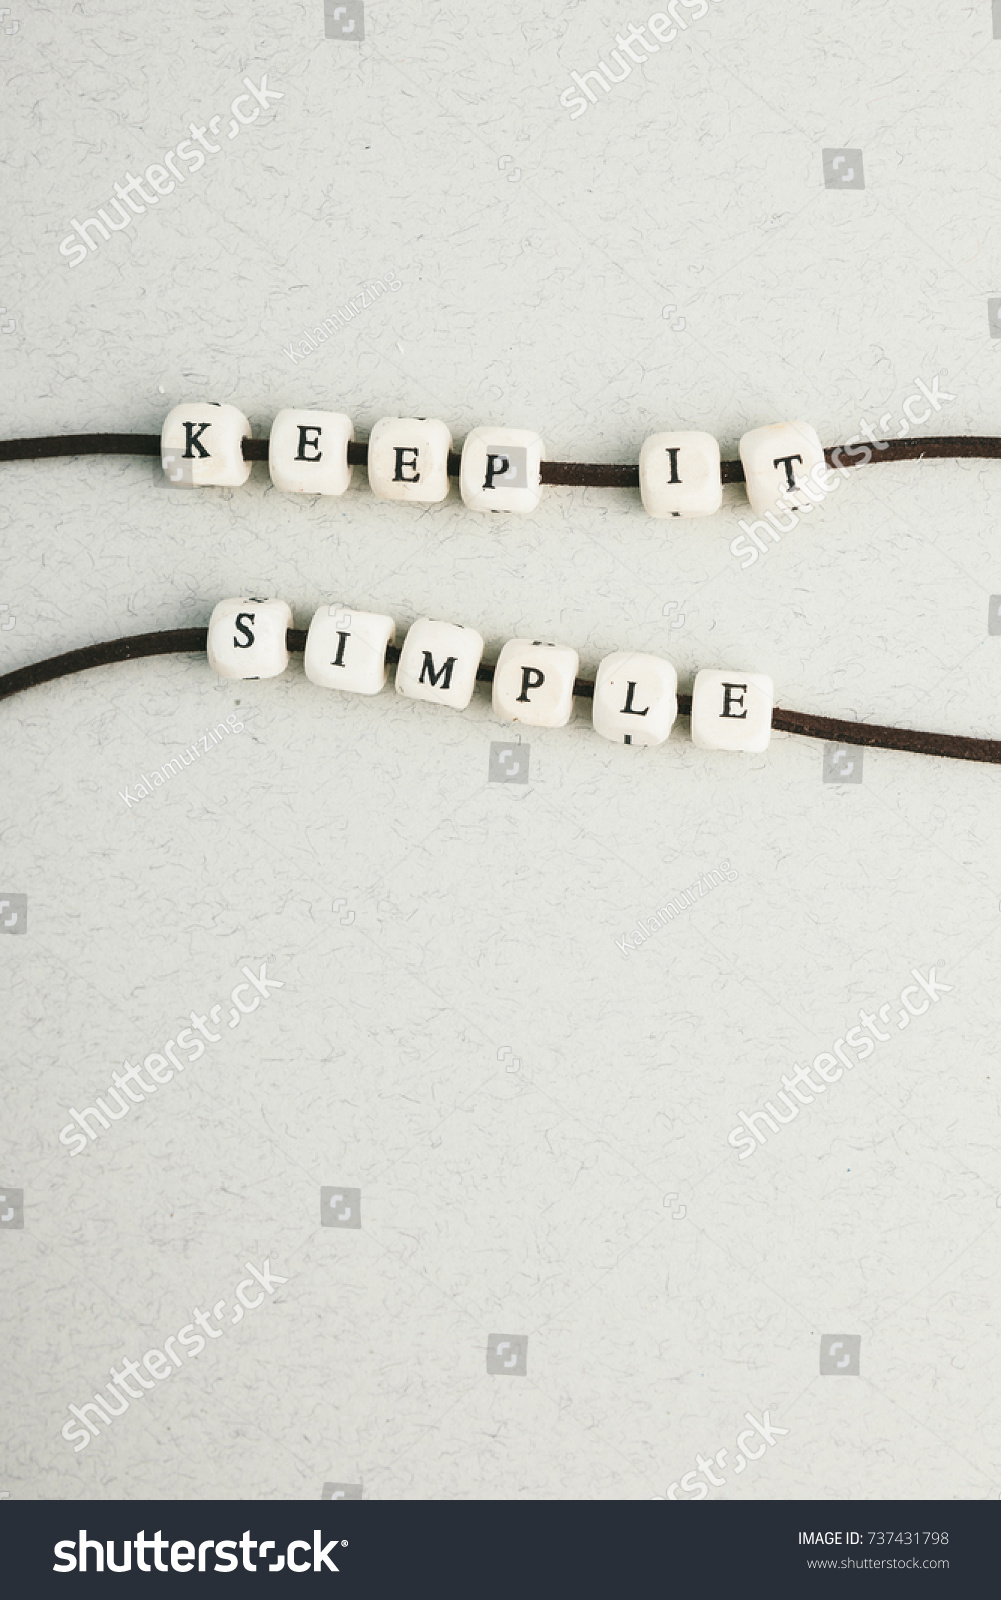 Motivation phrase Time is now from wooden beads strung on leather cord. Vertical composition. a series of photos with words and phrases #737431798